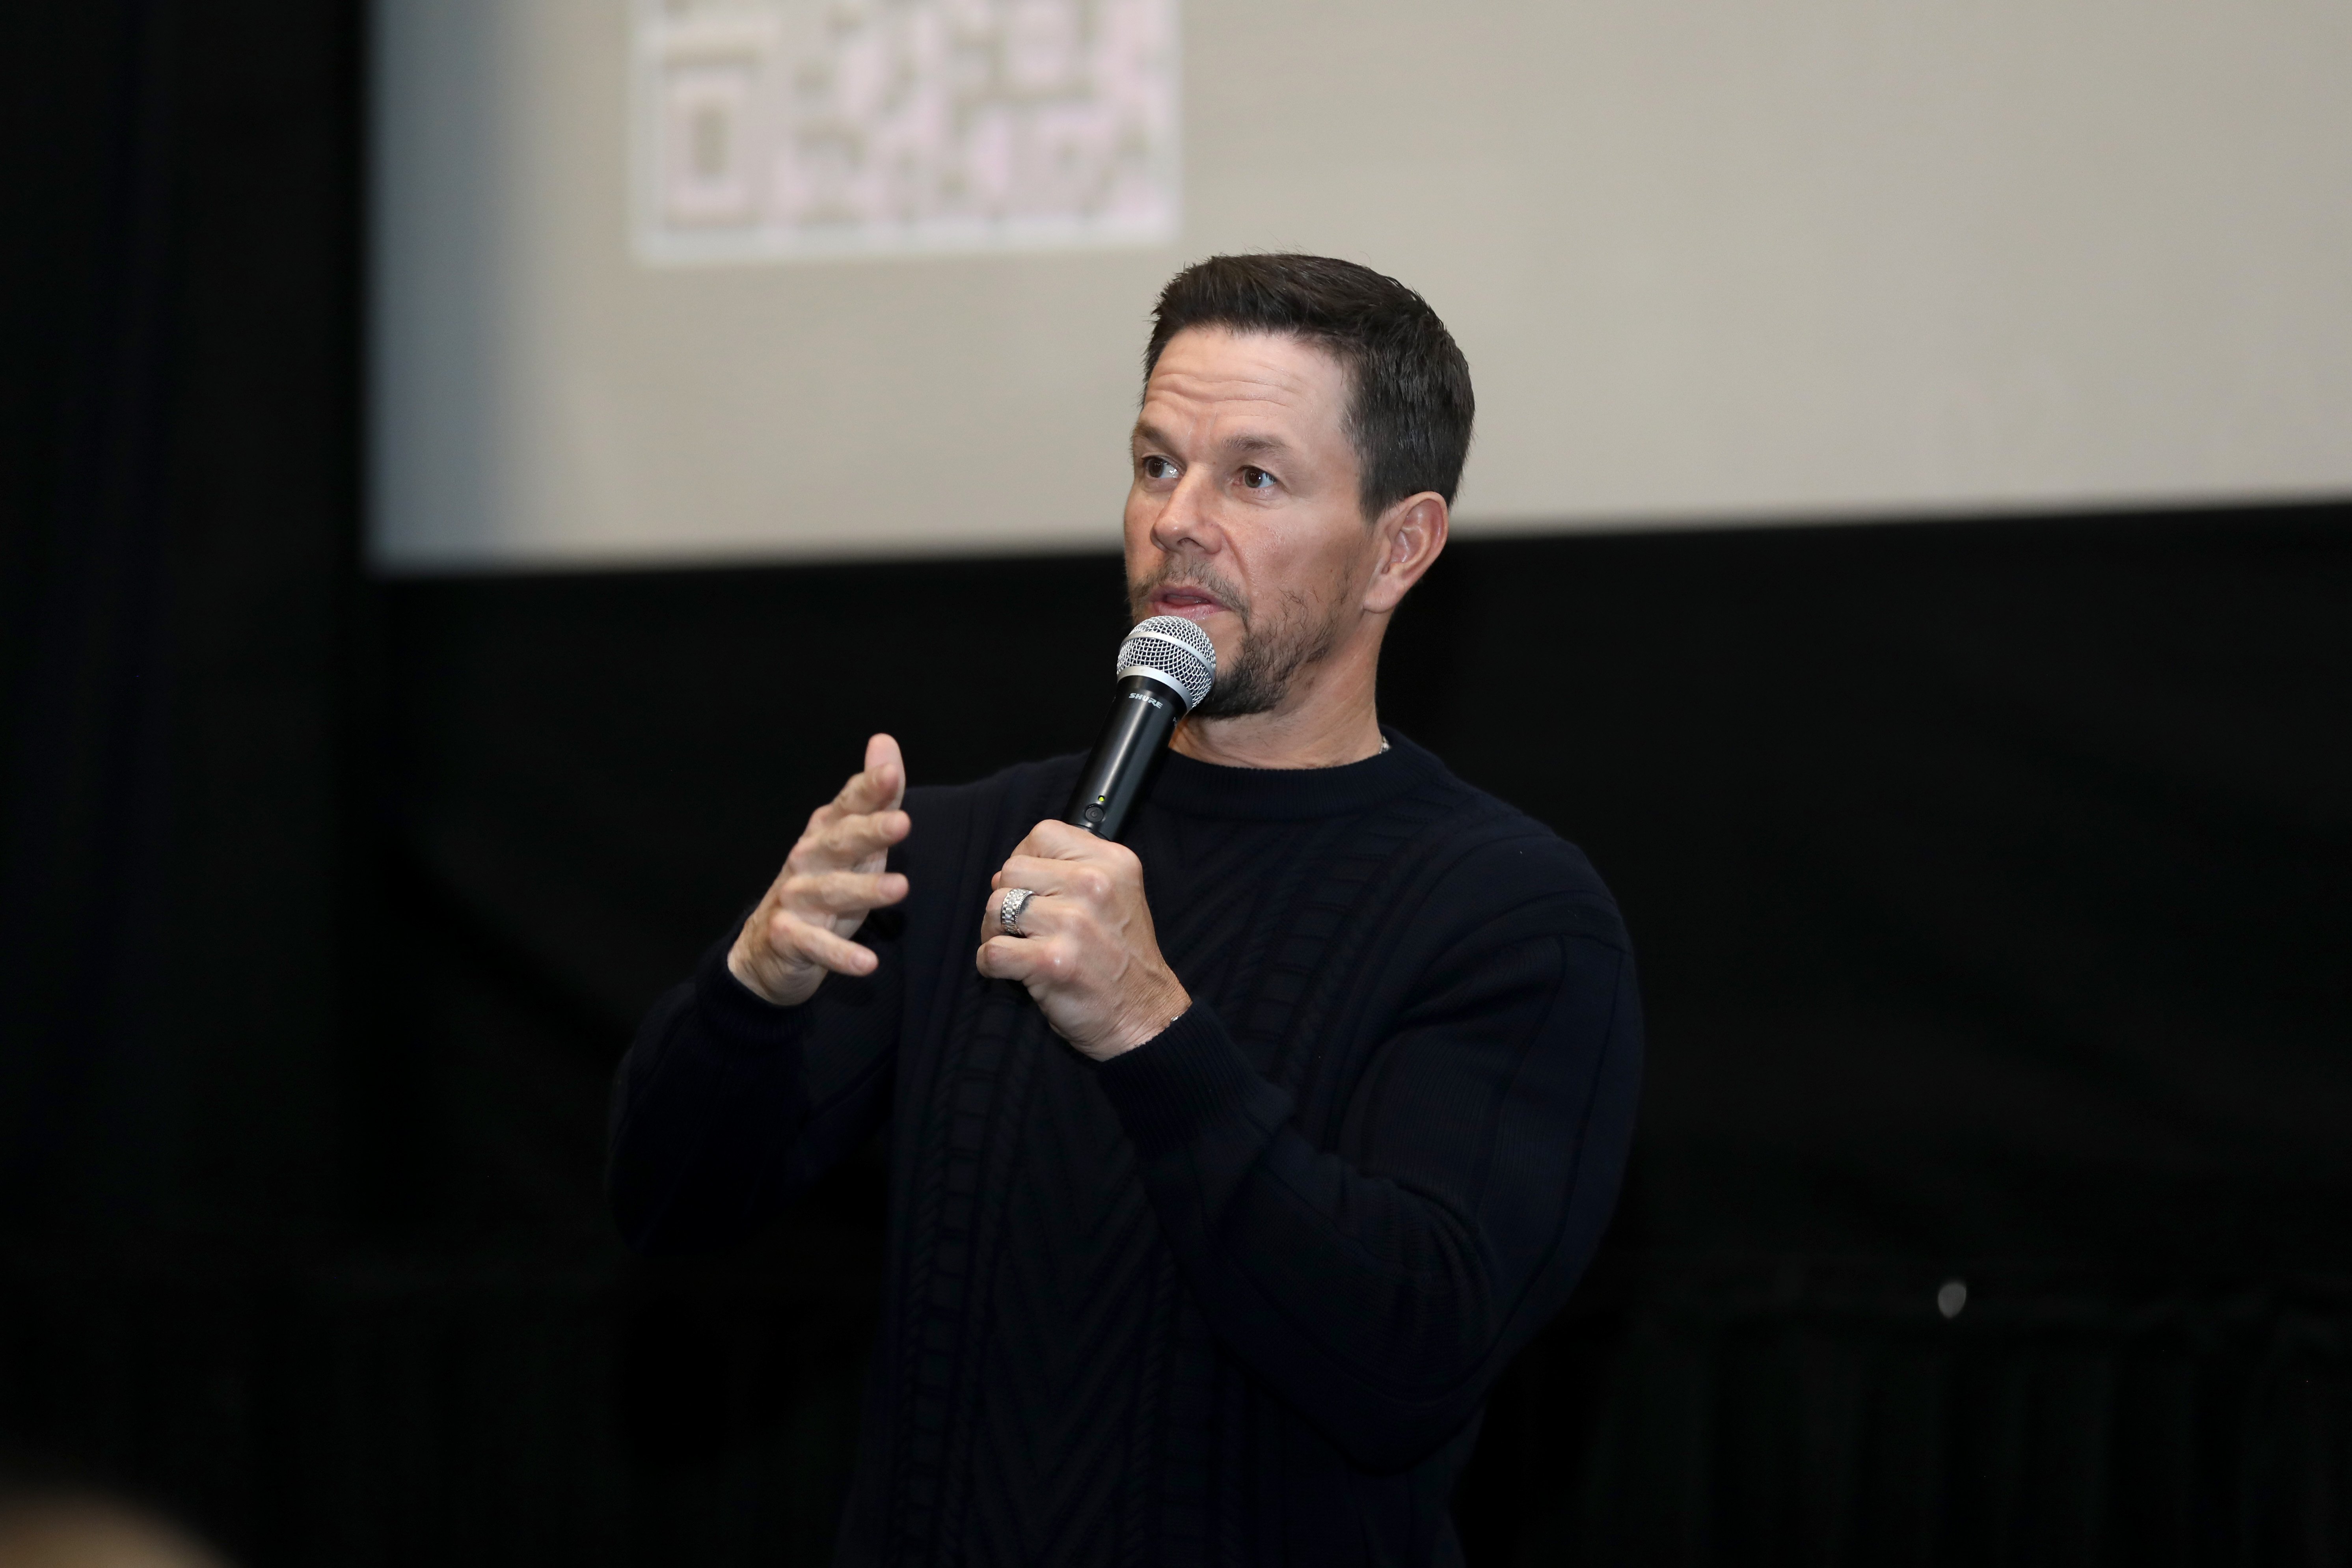 Mark Wahlberg from Boogie Nights speaks at a Boston special screening for his new movie Father Stu.